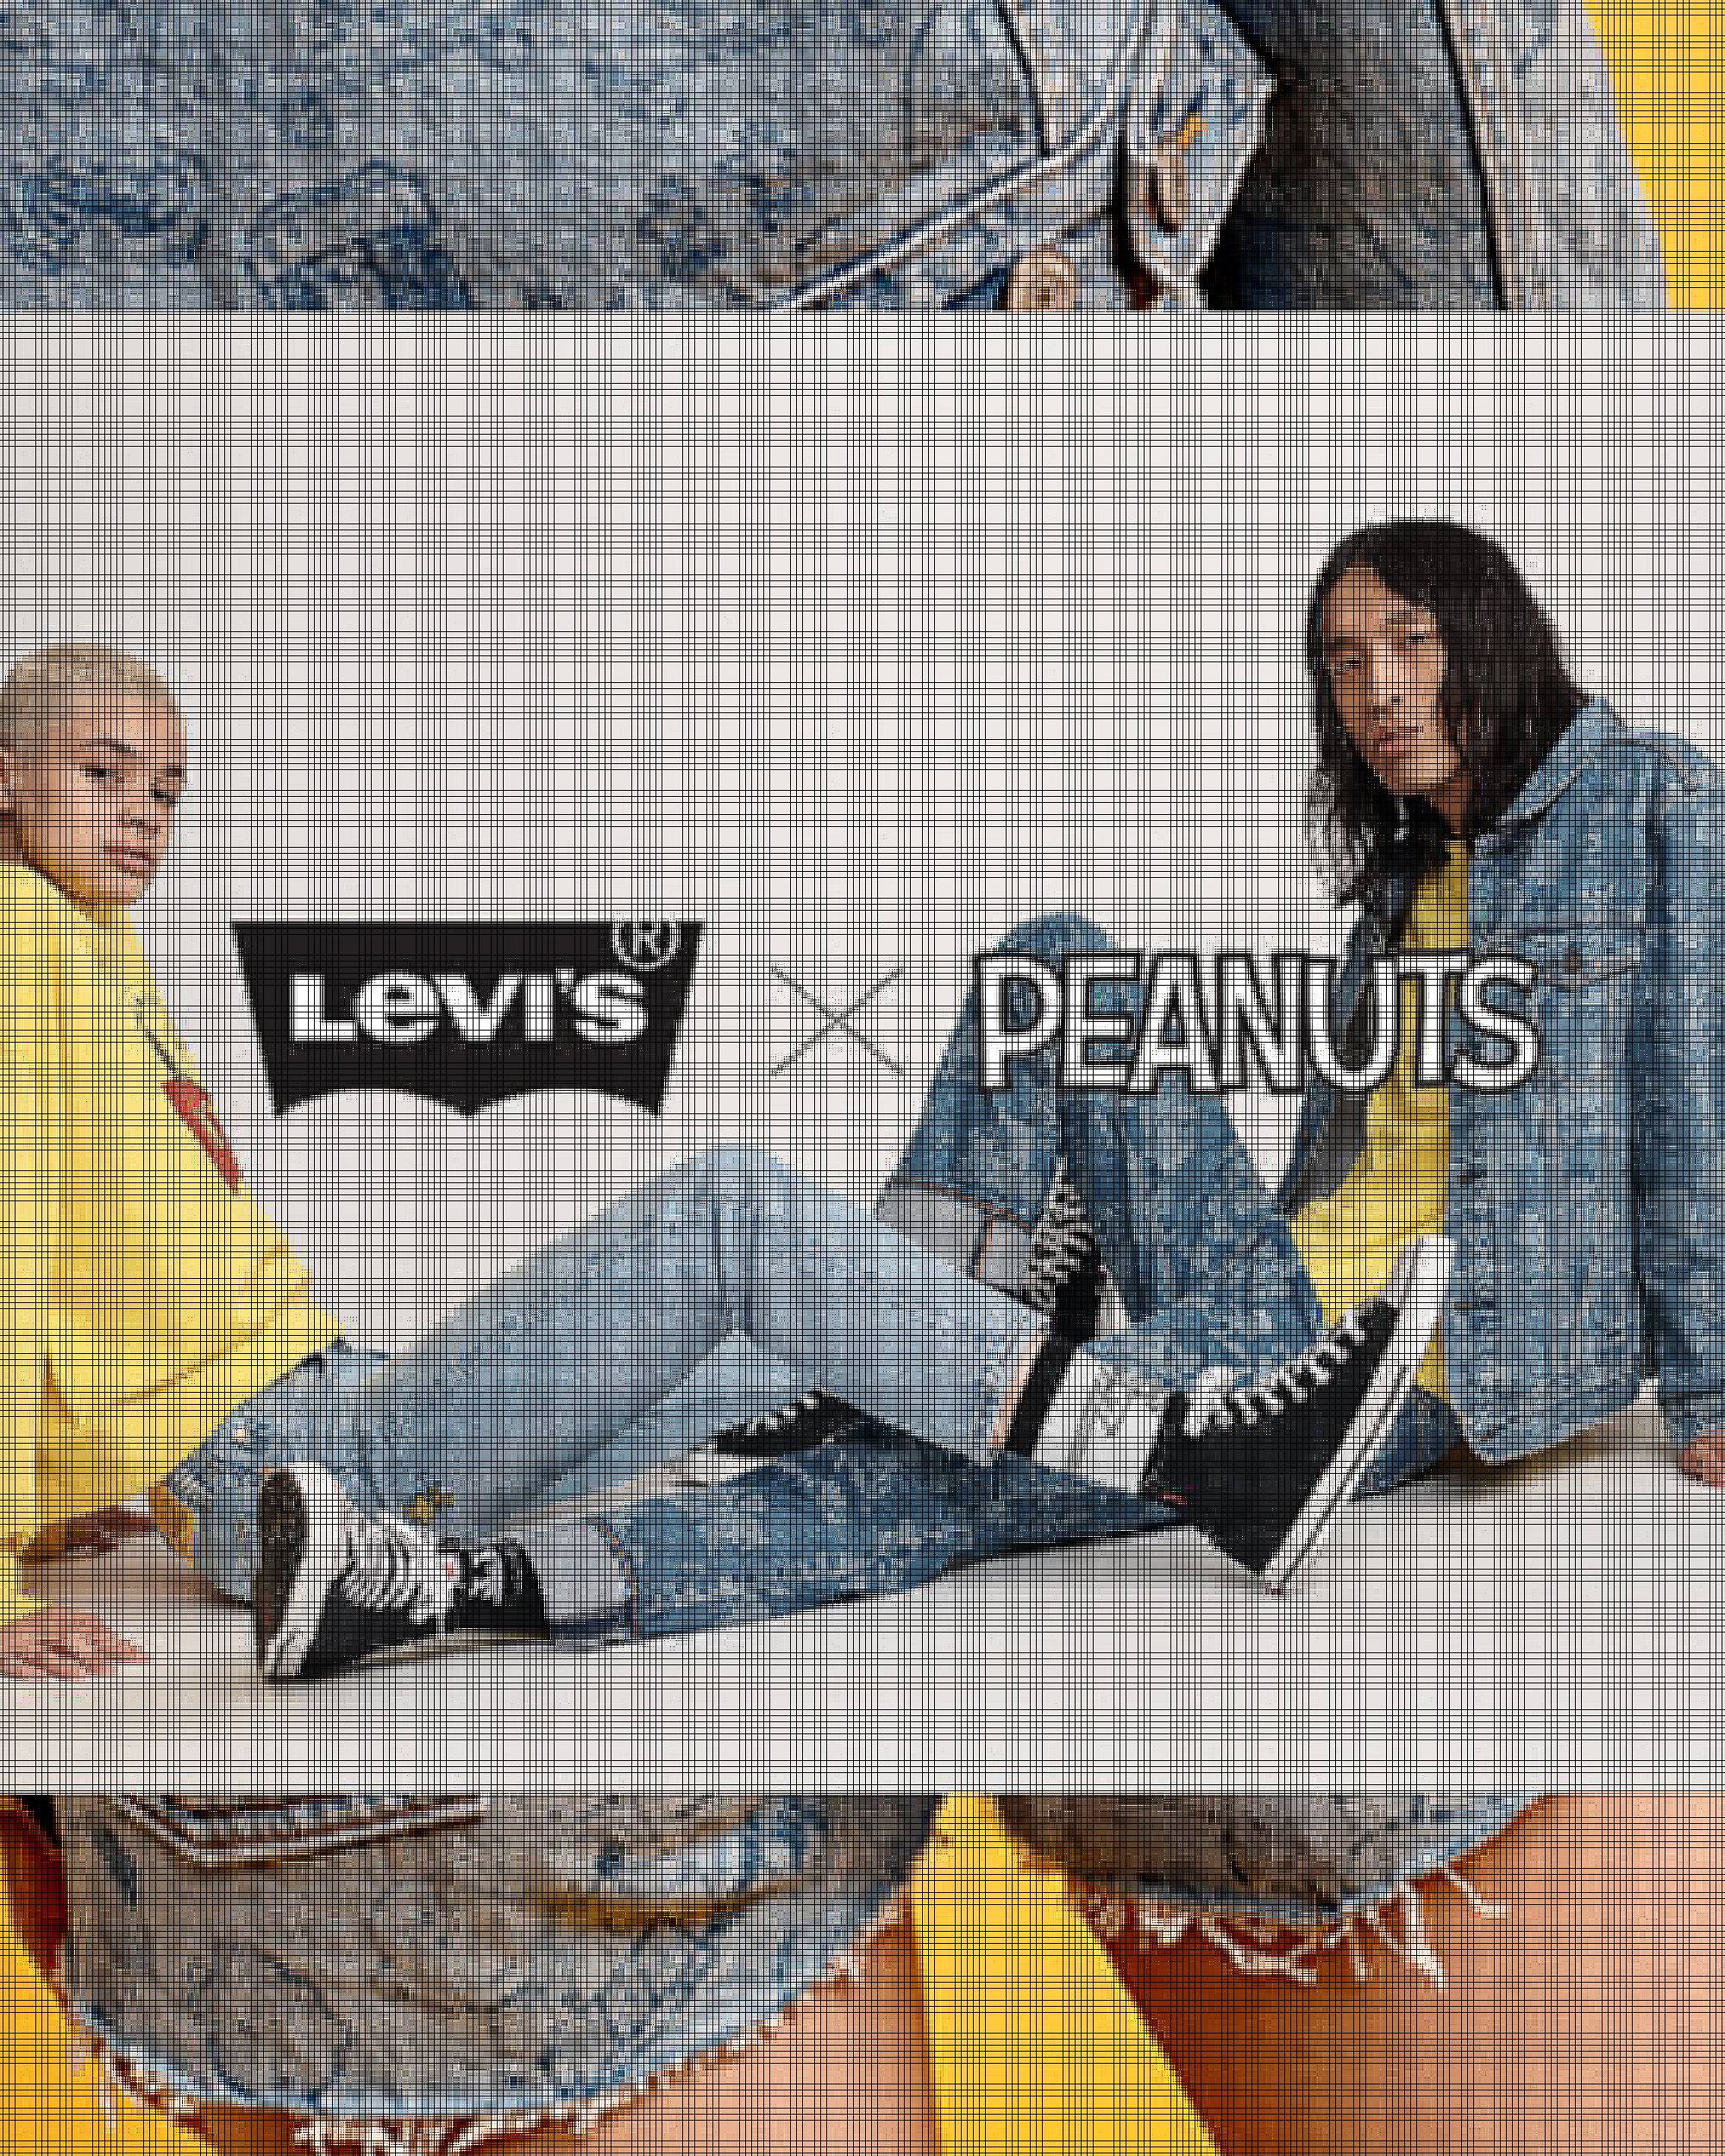 Peanuts collab header, three images with models wearing peanuts clothing and yellow background.